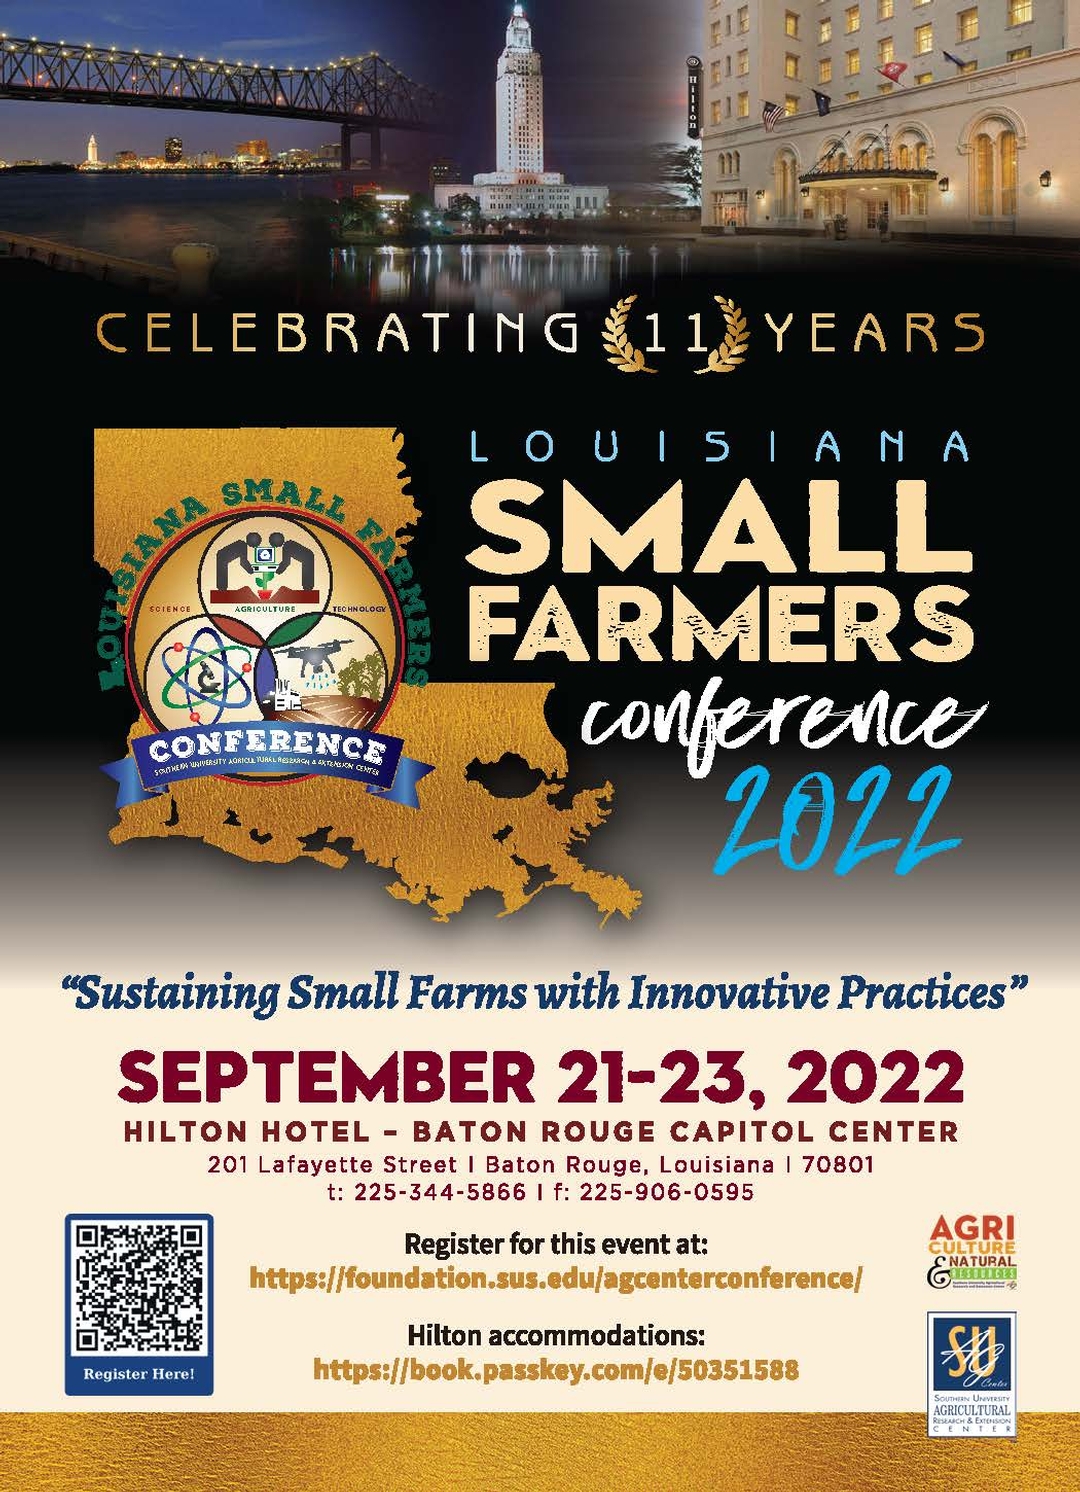 11th Annual Louisiana Small Farmers Conference Registration is Now Open